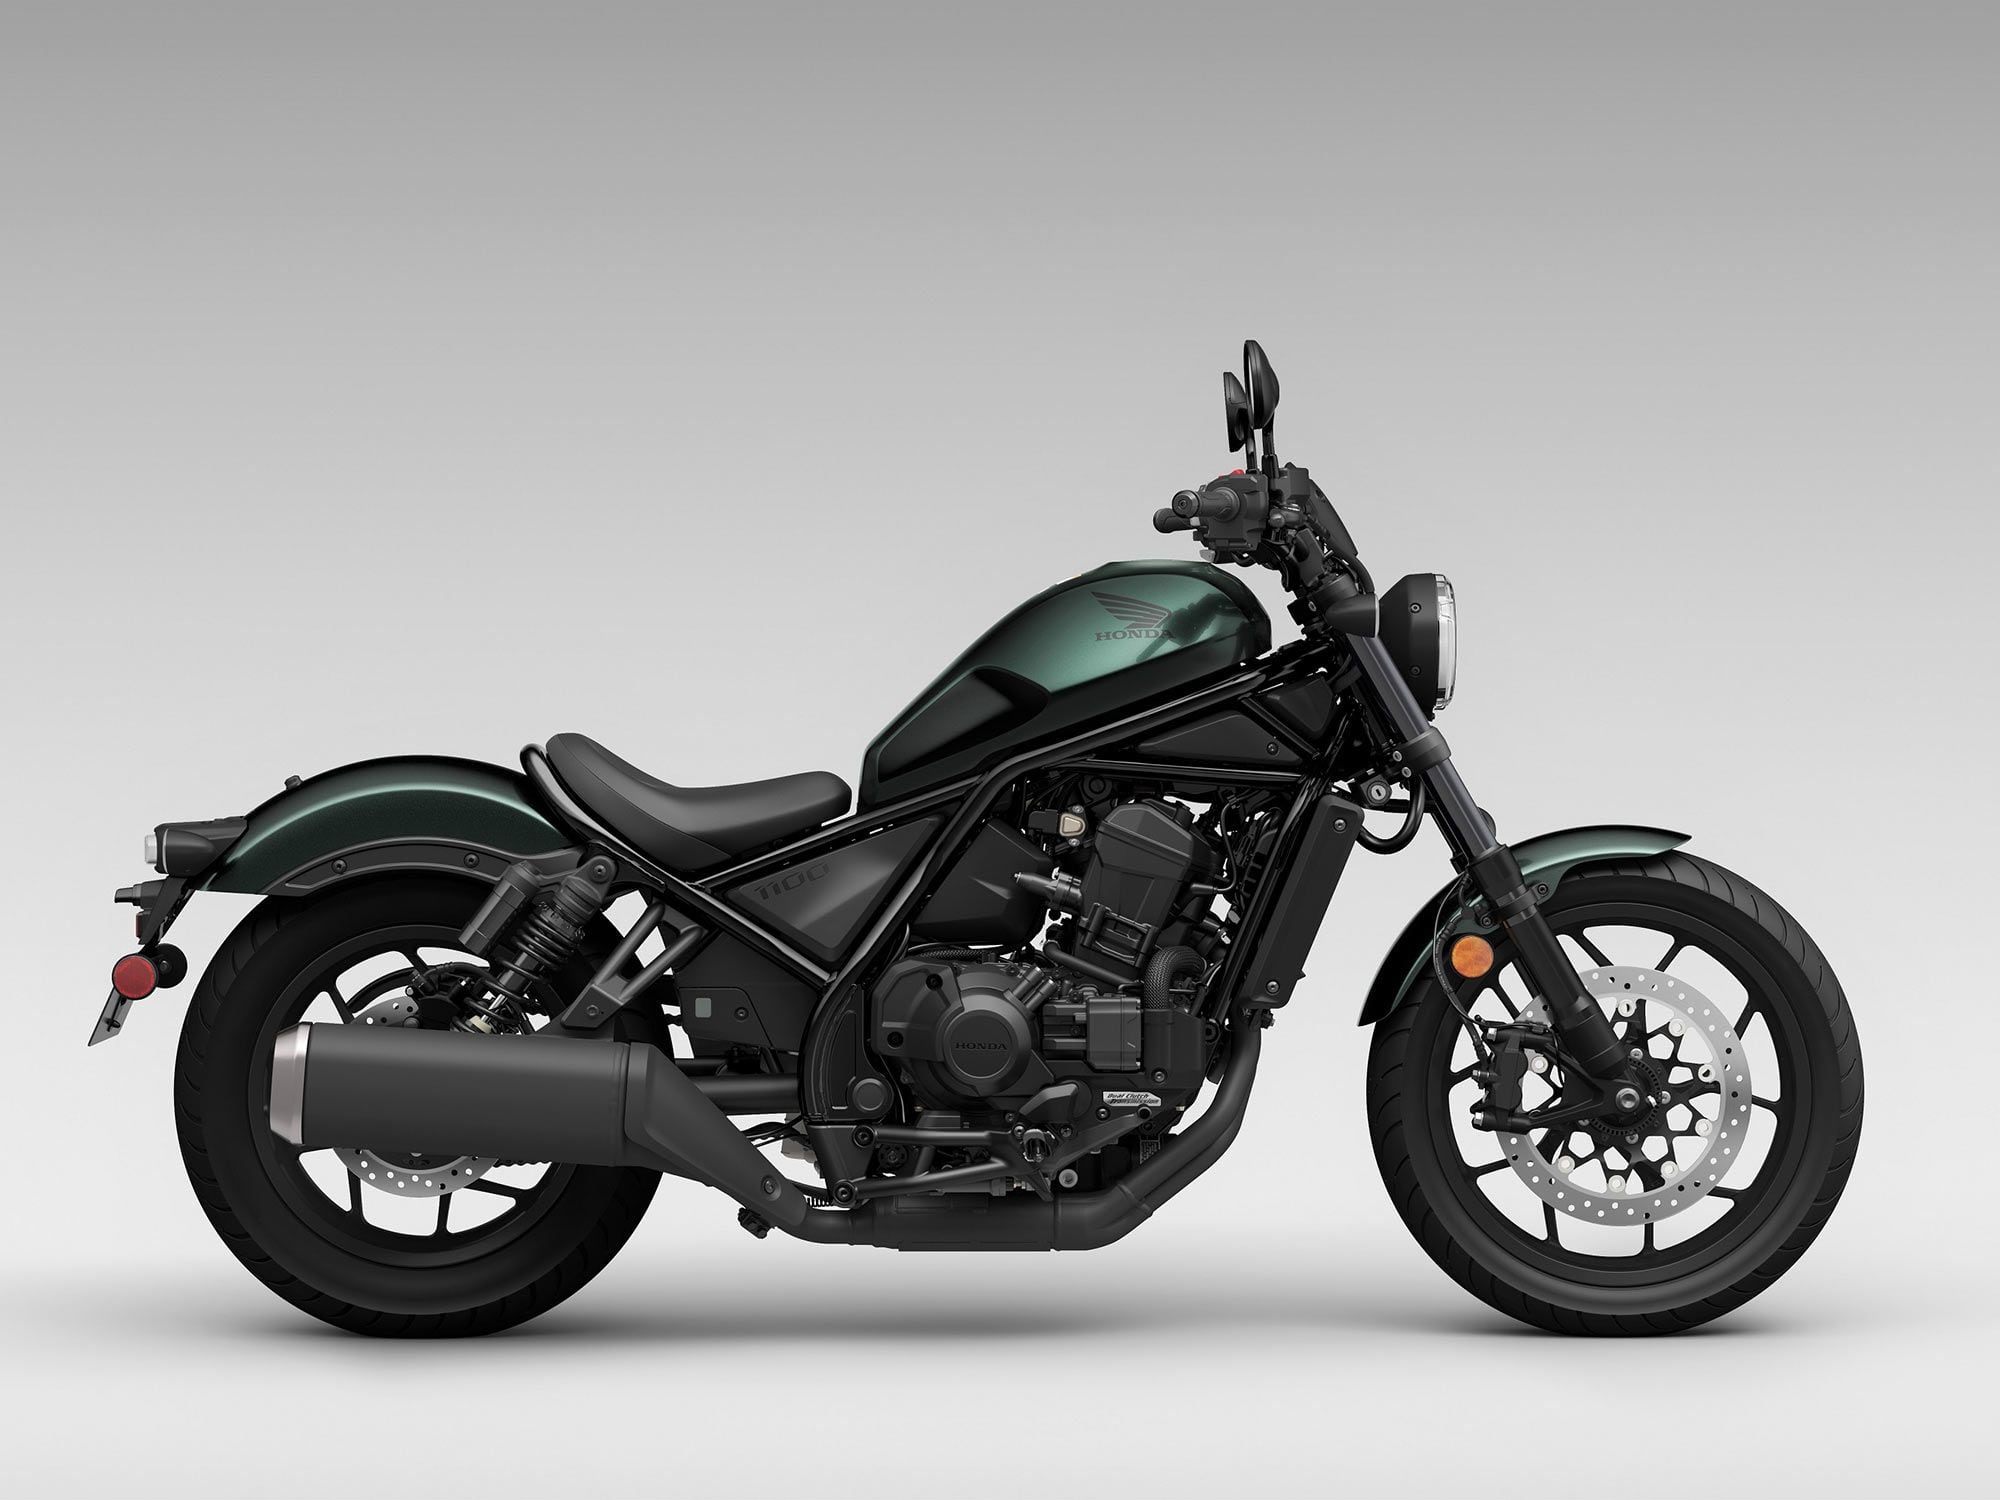 The standard Rebel 1100 returns to the lineup for 2023 unchanged, and still available with either manual or DCT transmission.